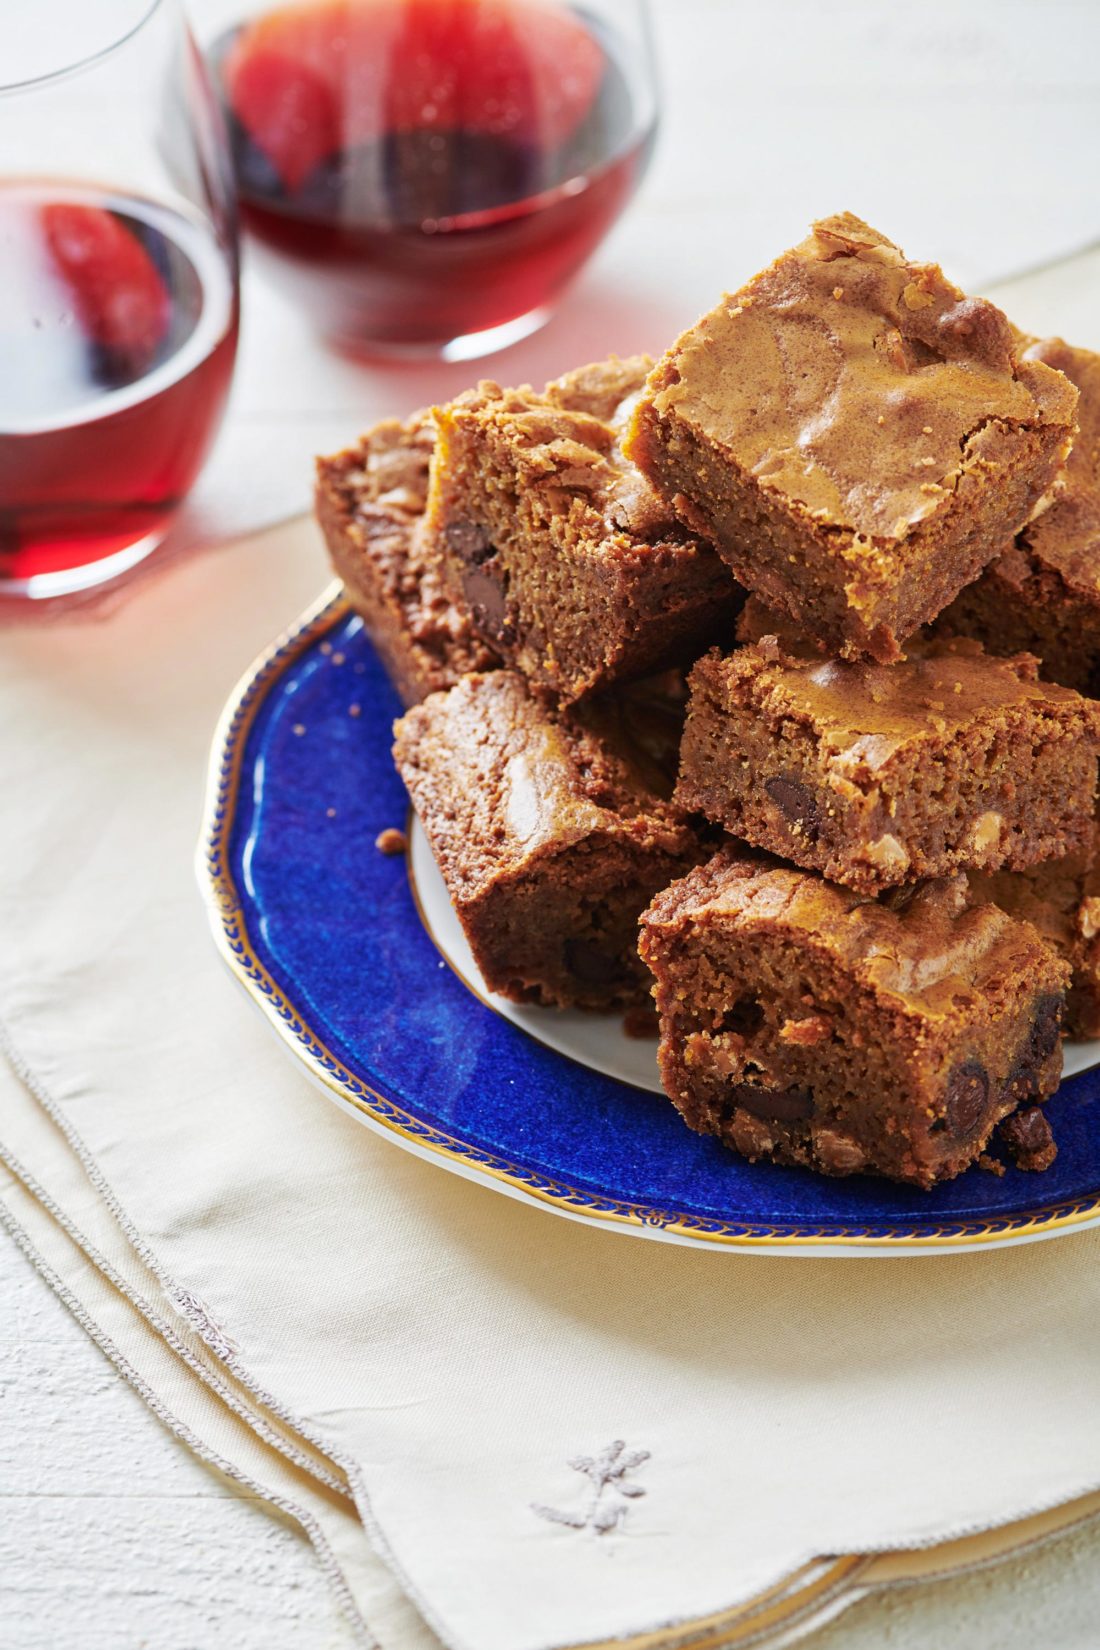 Blondies piled high on a plate.